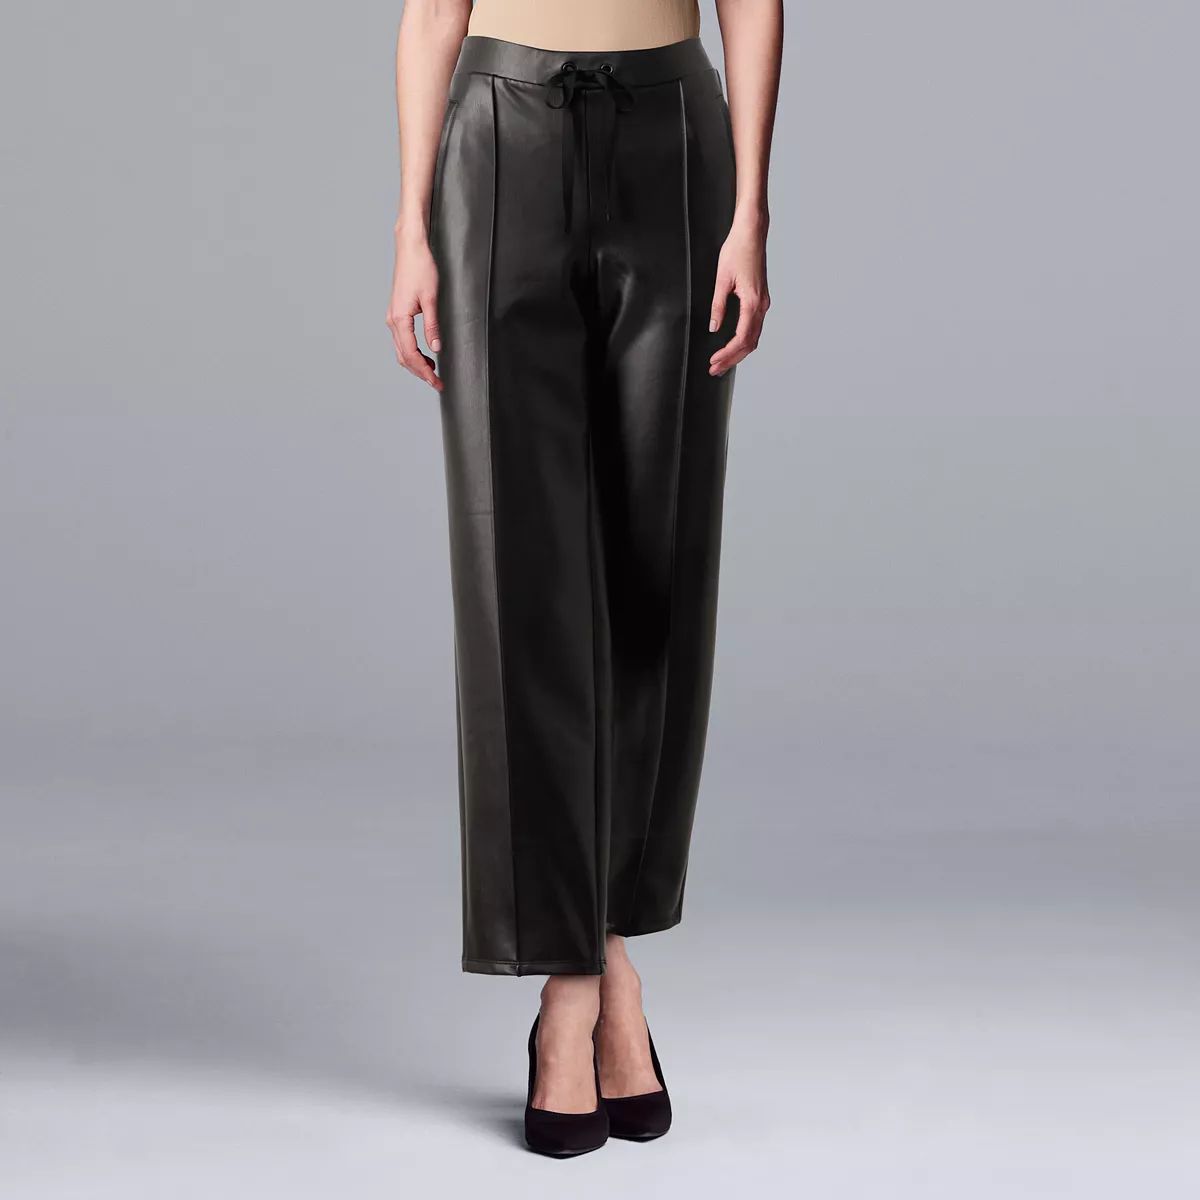 Women's Simply Vera Vera Wang Tapered Faux-Leather Pants | Kohl's